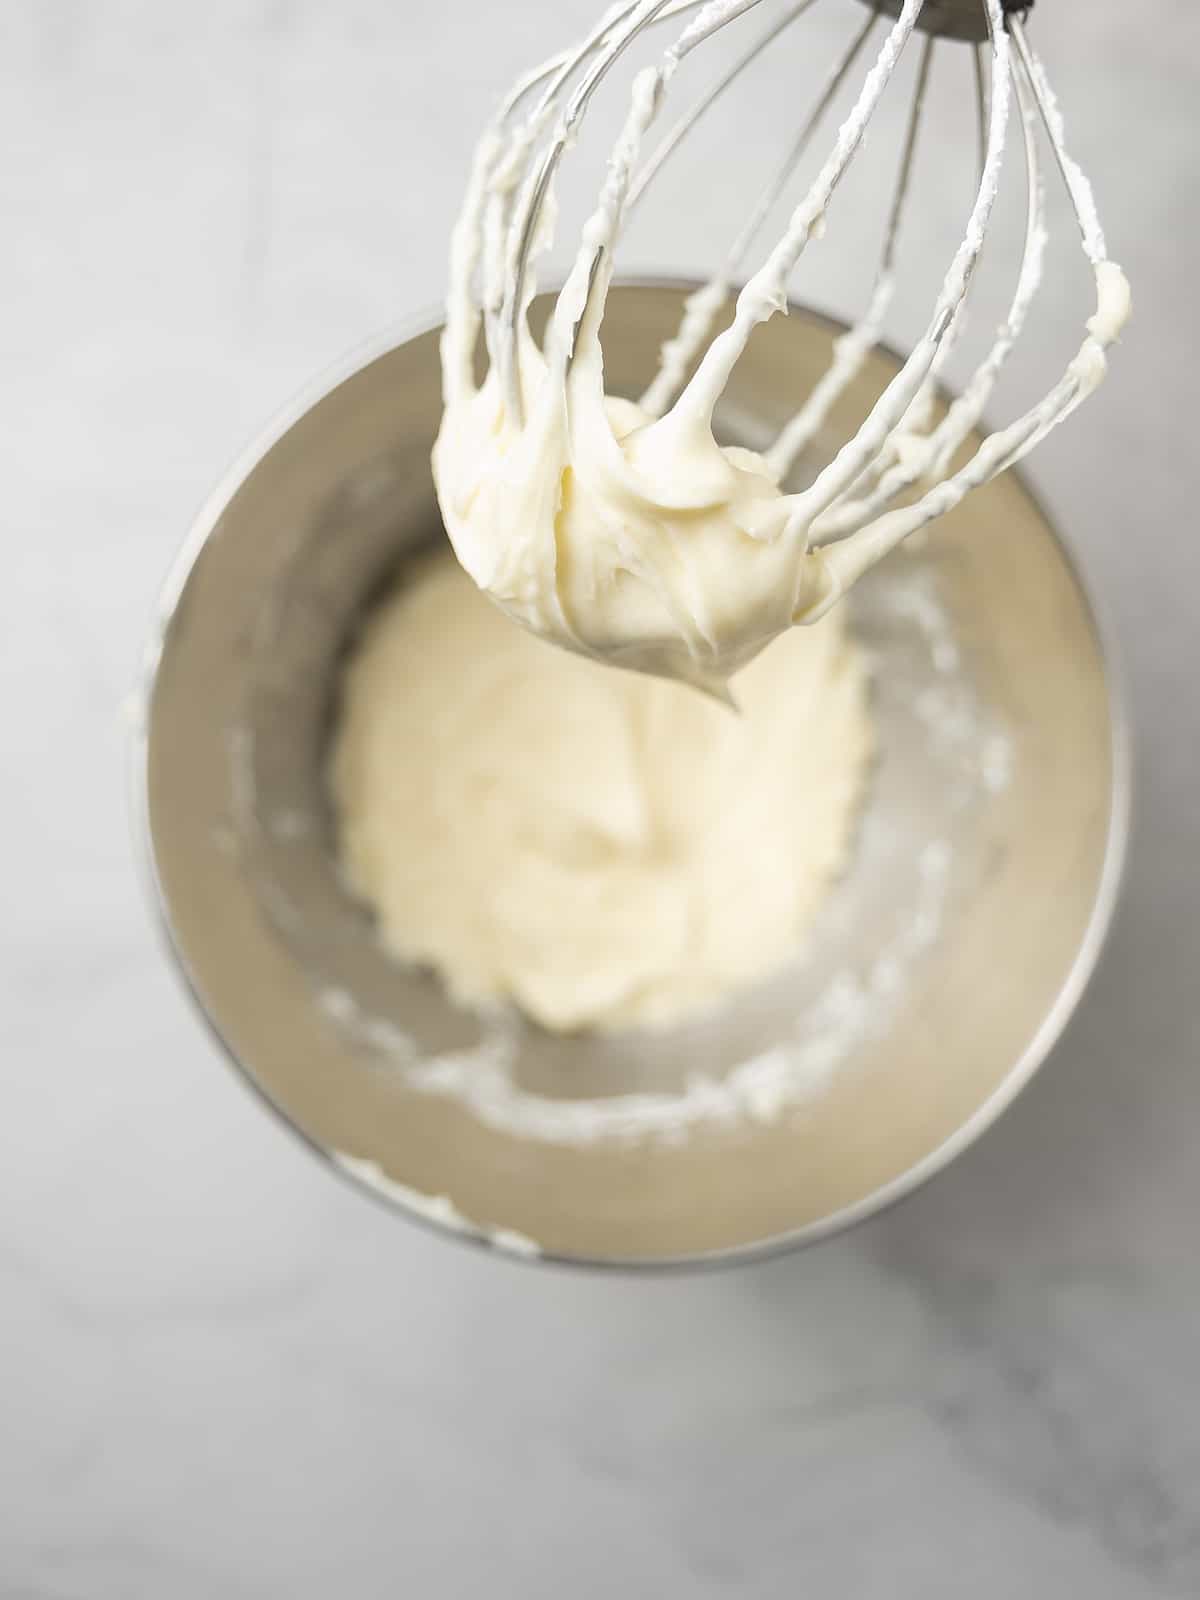 The whisk attachment of a stand mixer held above a metal bowl with beaten cream cheese frosting.